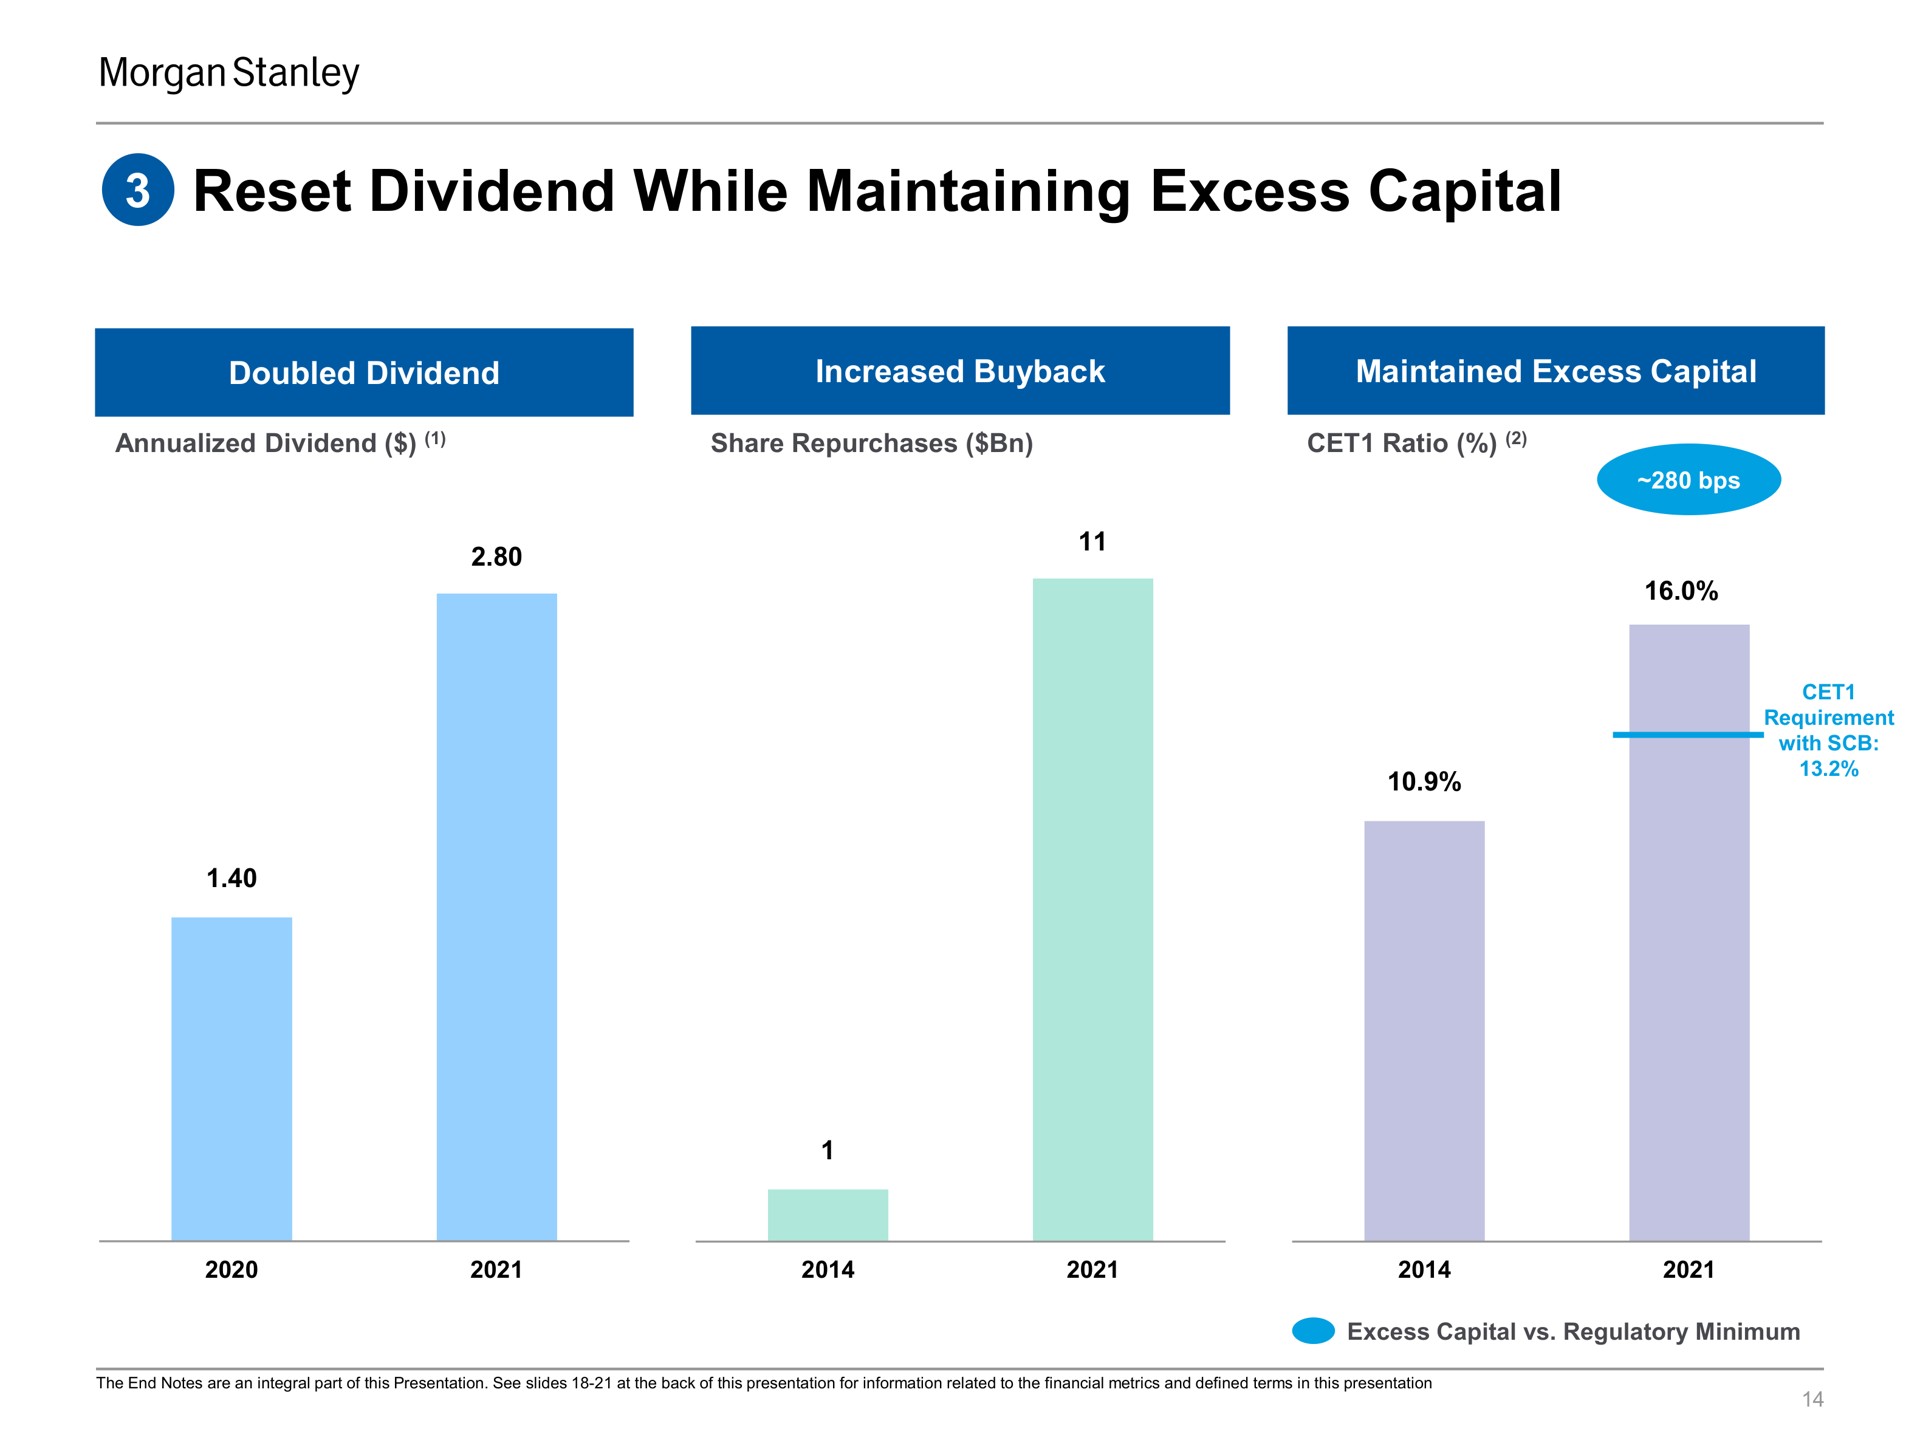 reset dividend while maintaining excess capital | Morgan Stanley